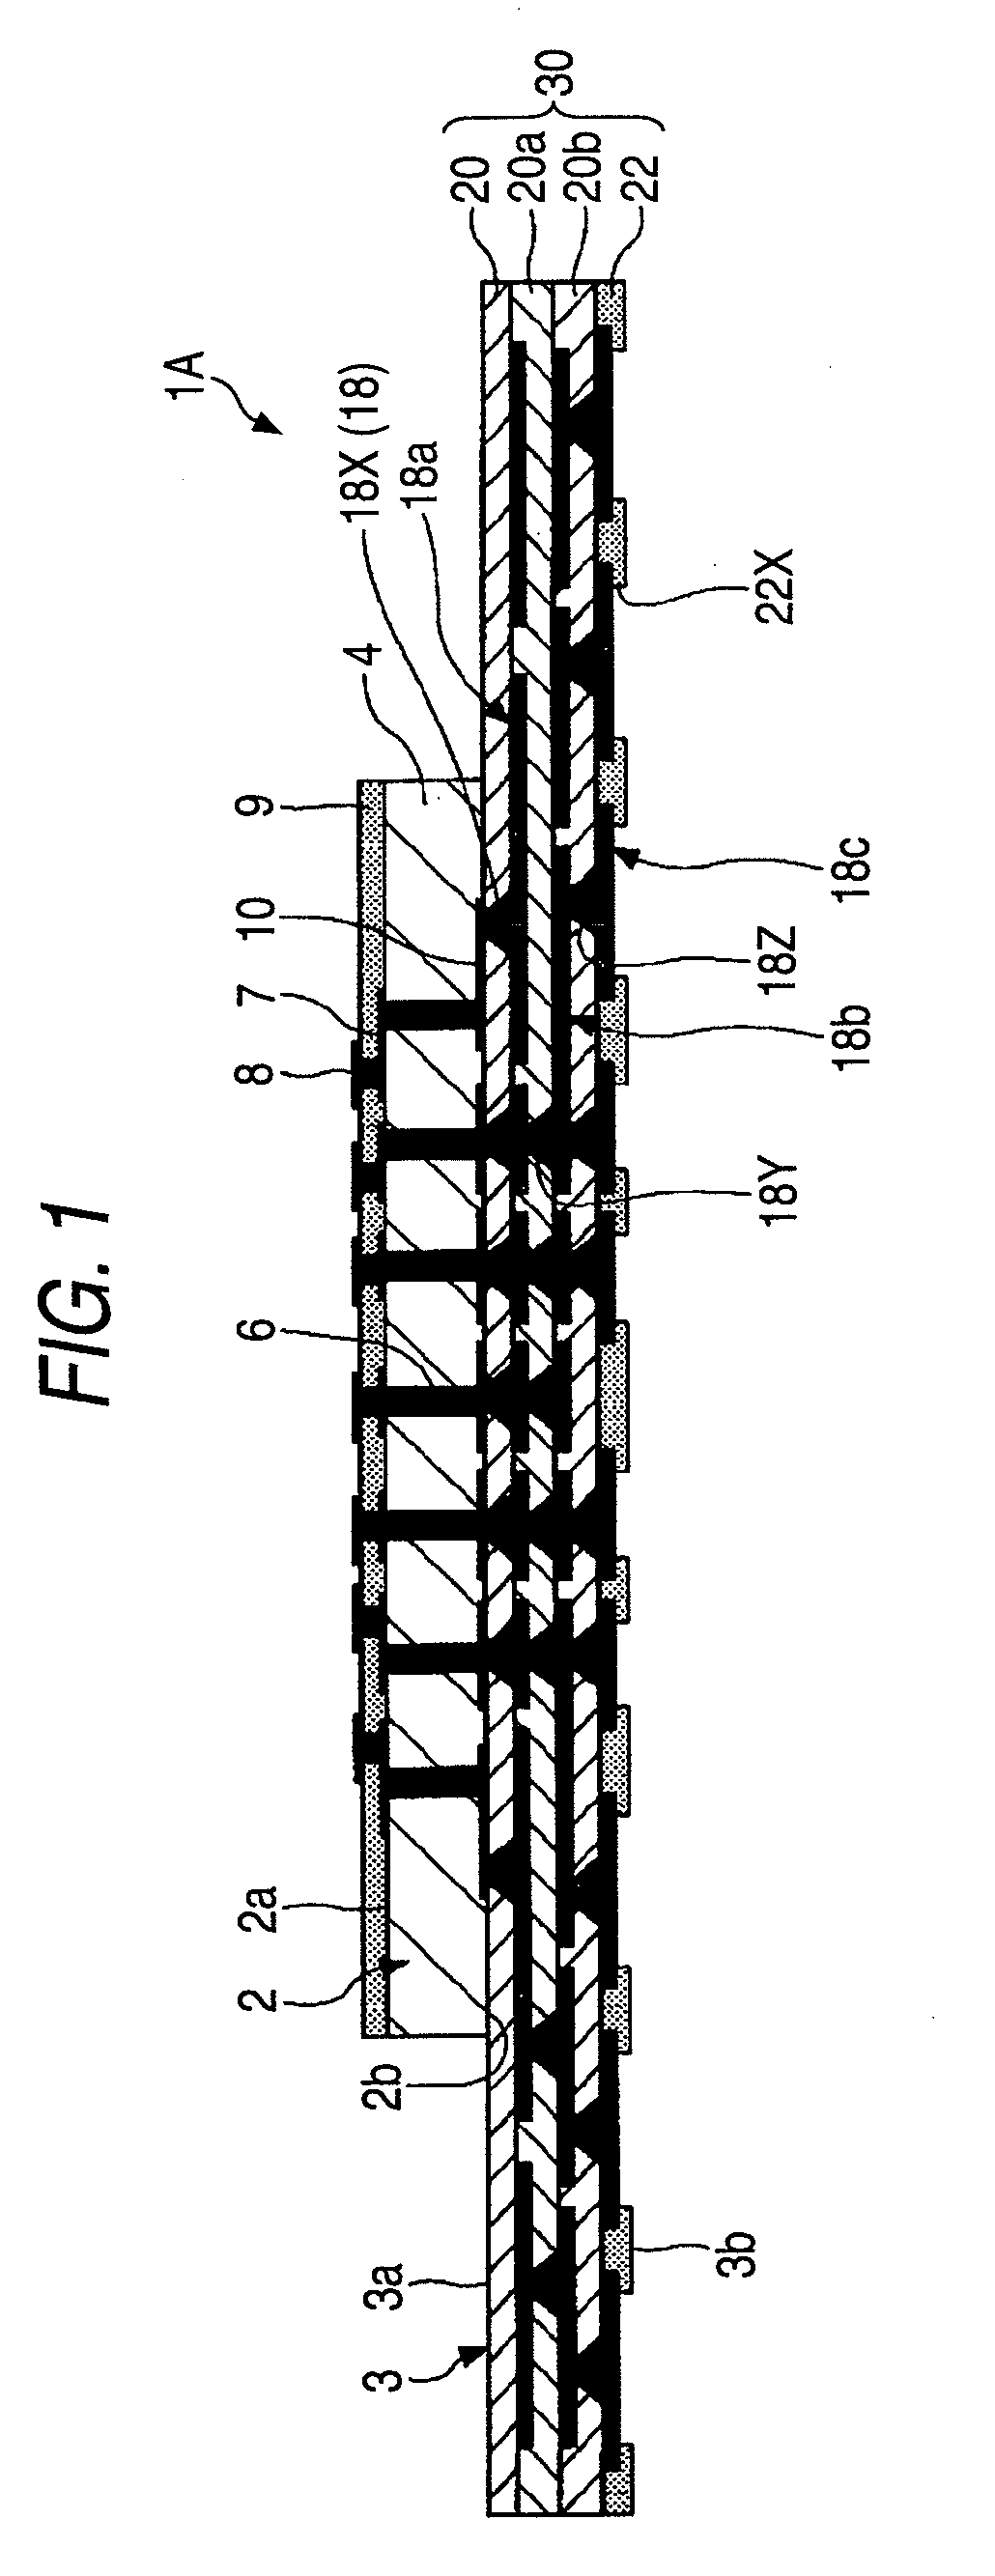 Wiring board, semiconductor device having wiring board, and method of manufacturing wiring board